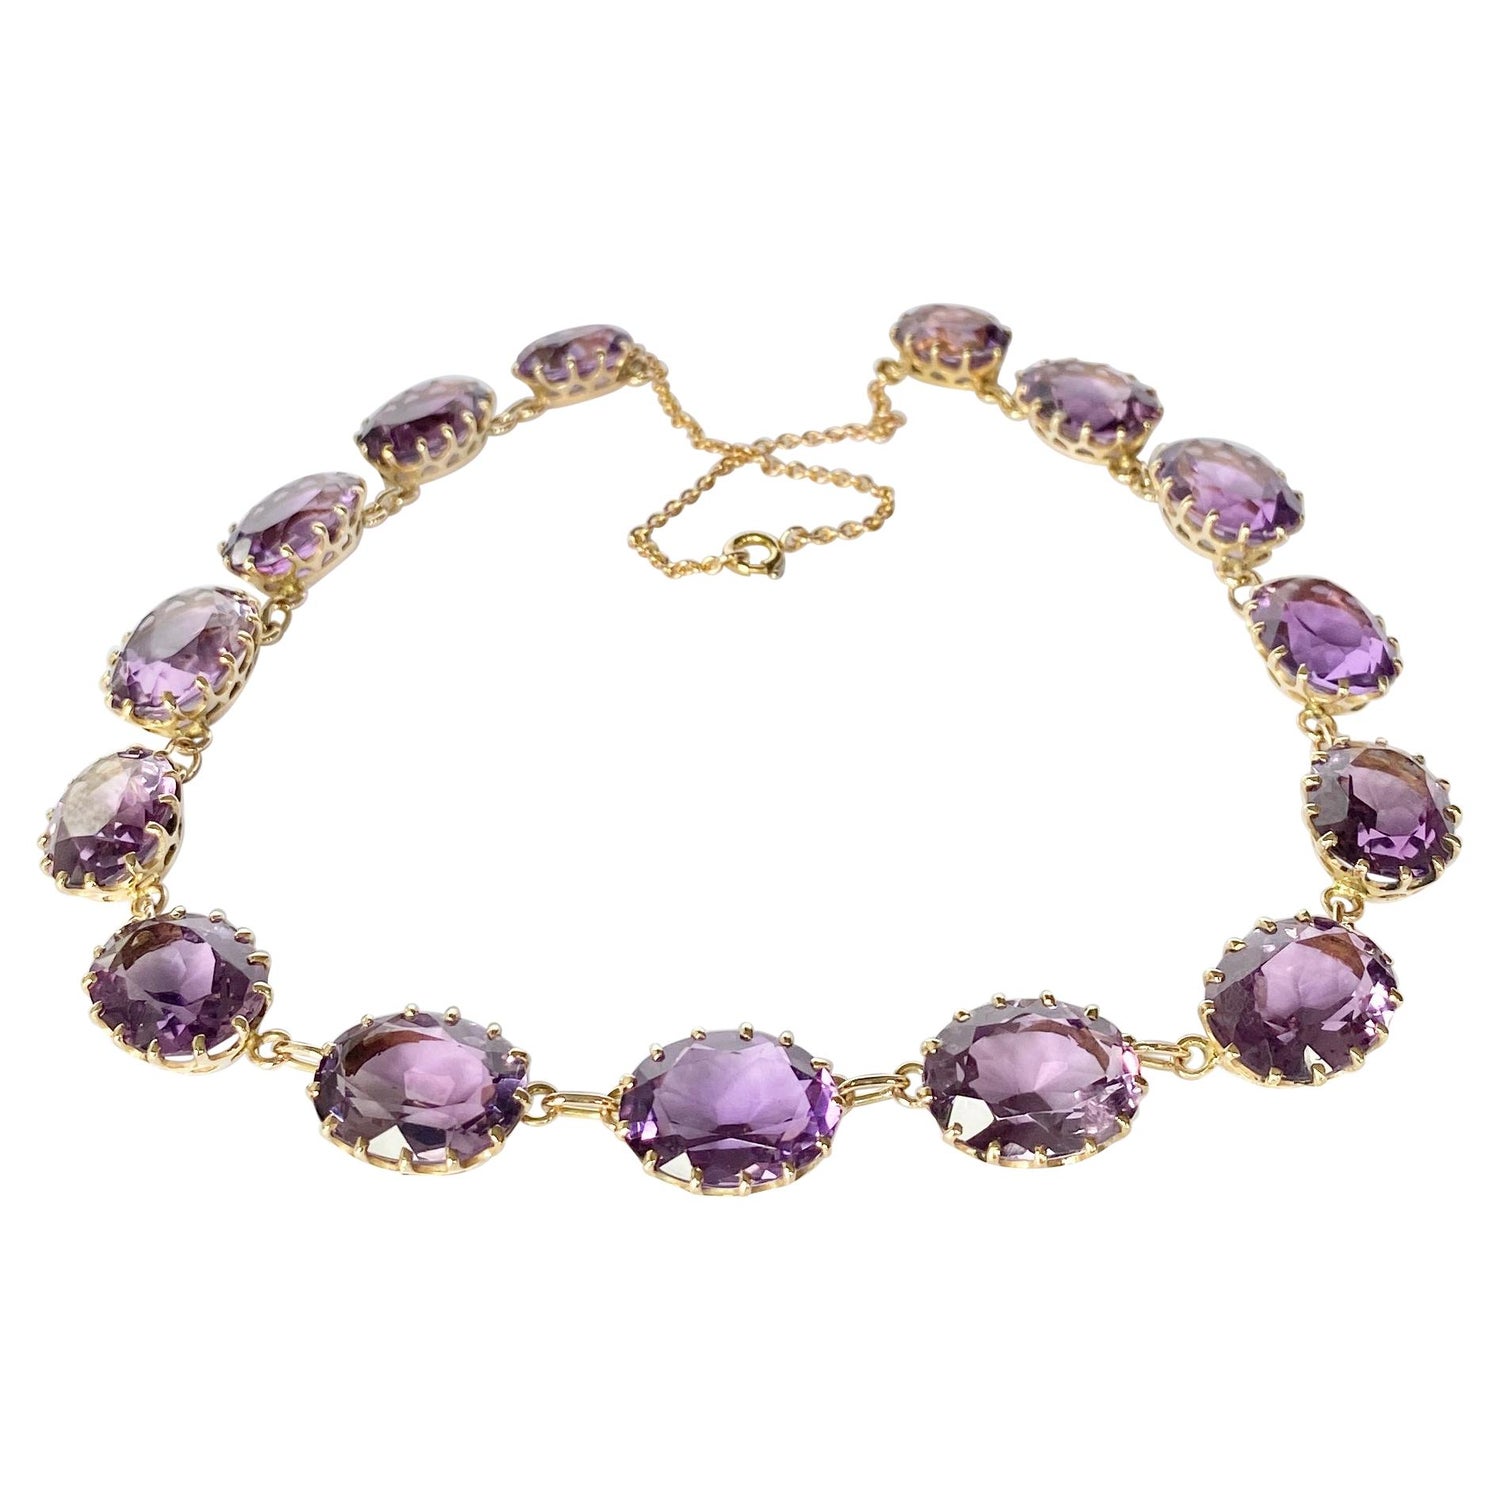 Details about   9ct Gold  Oval Shape Amethyst Necklace